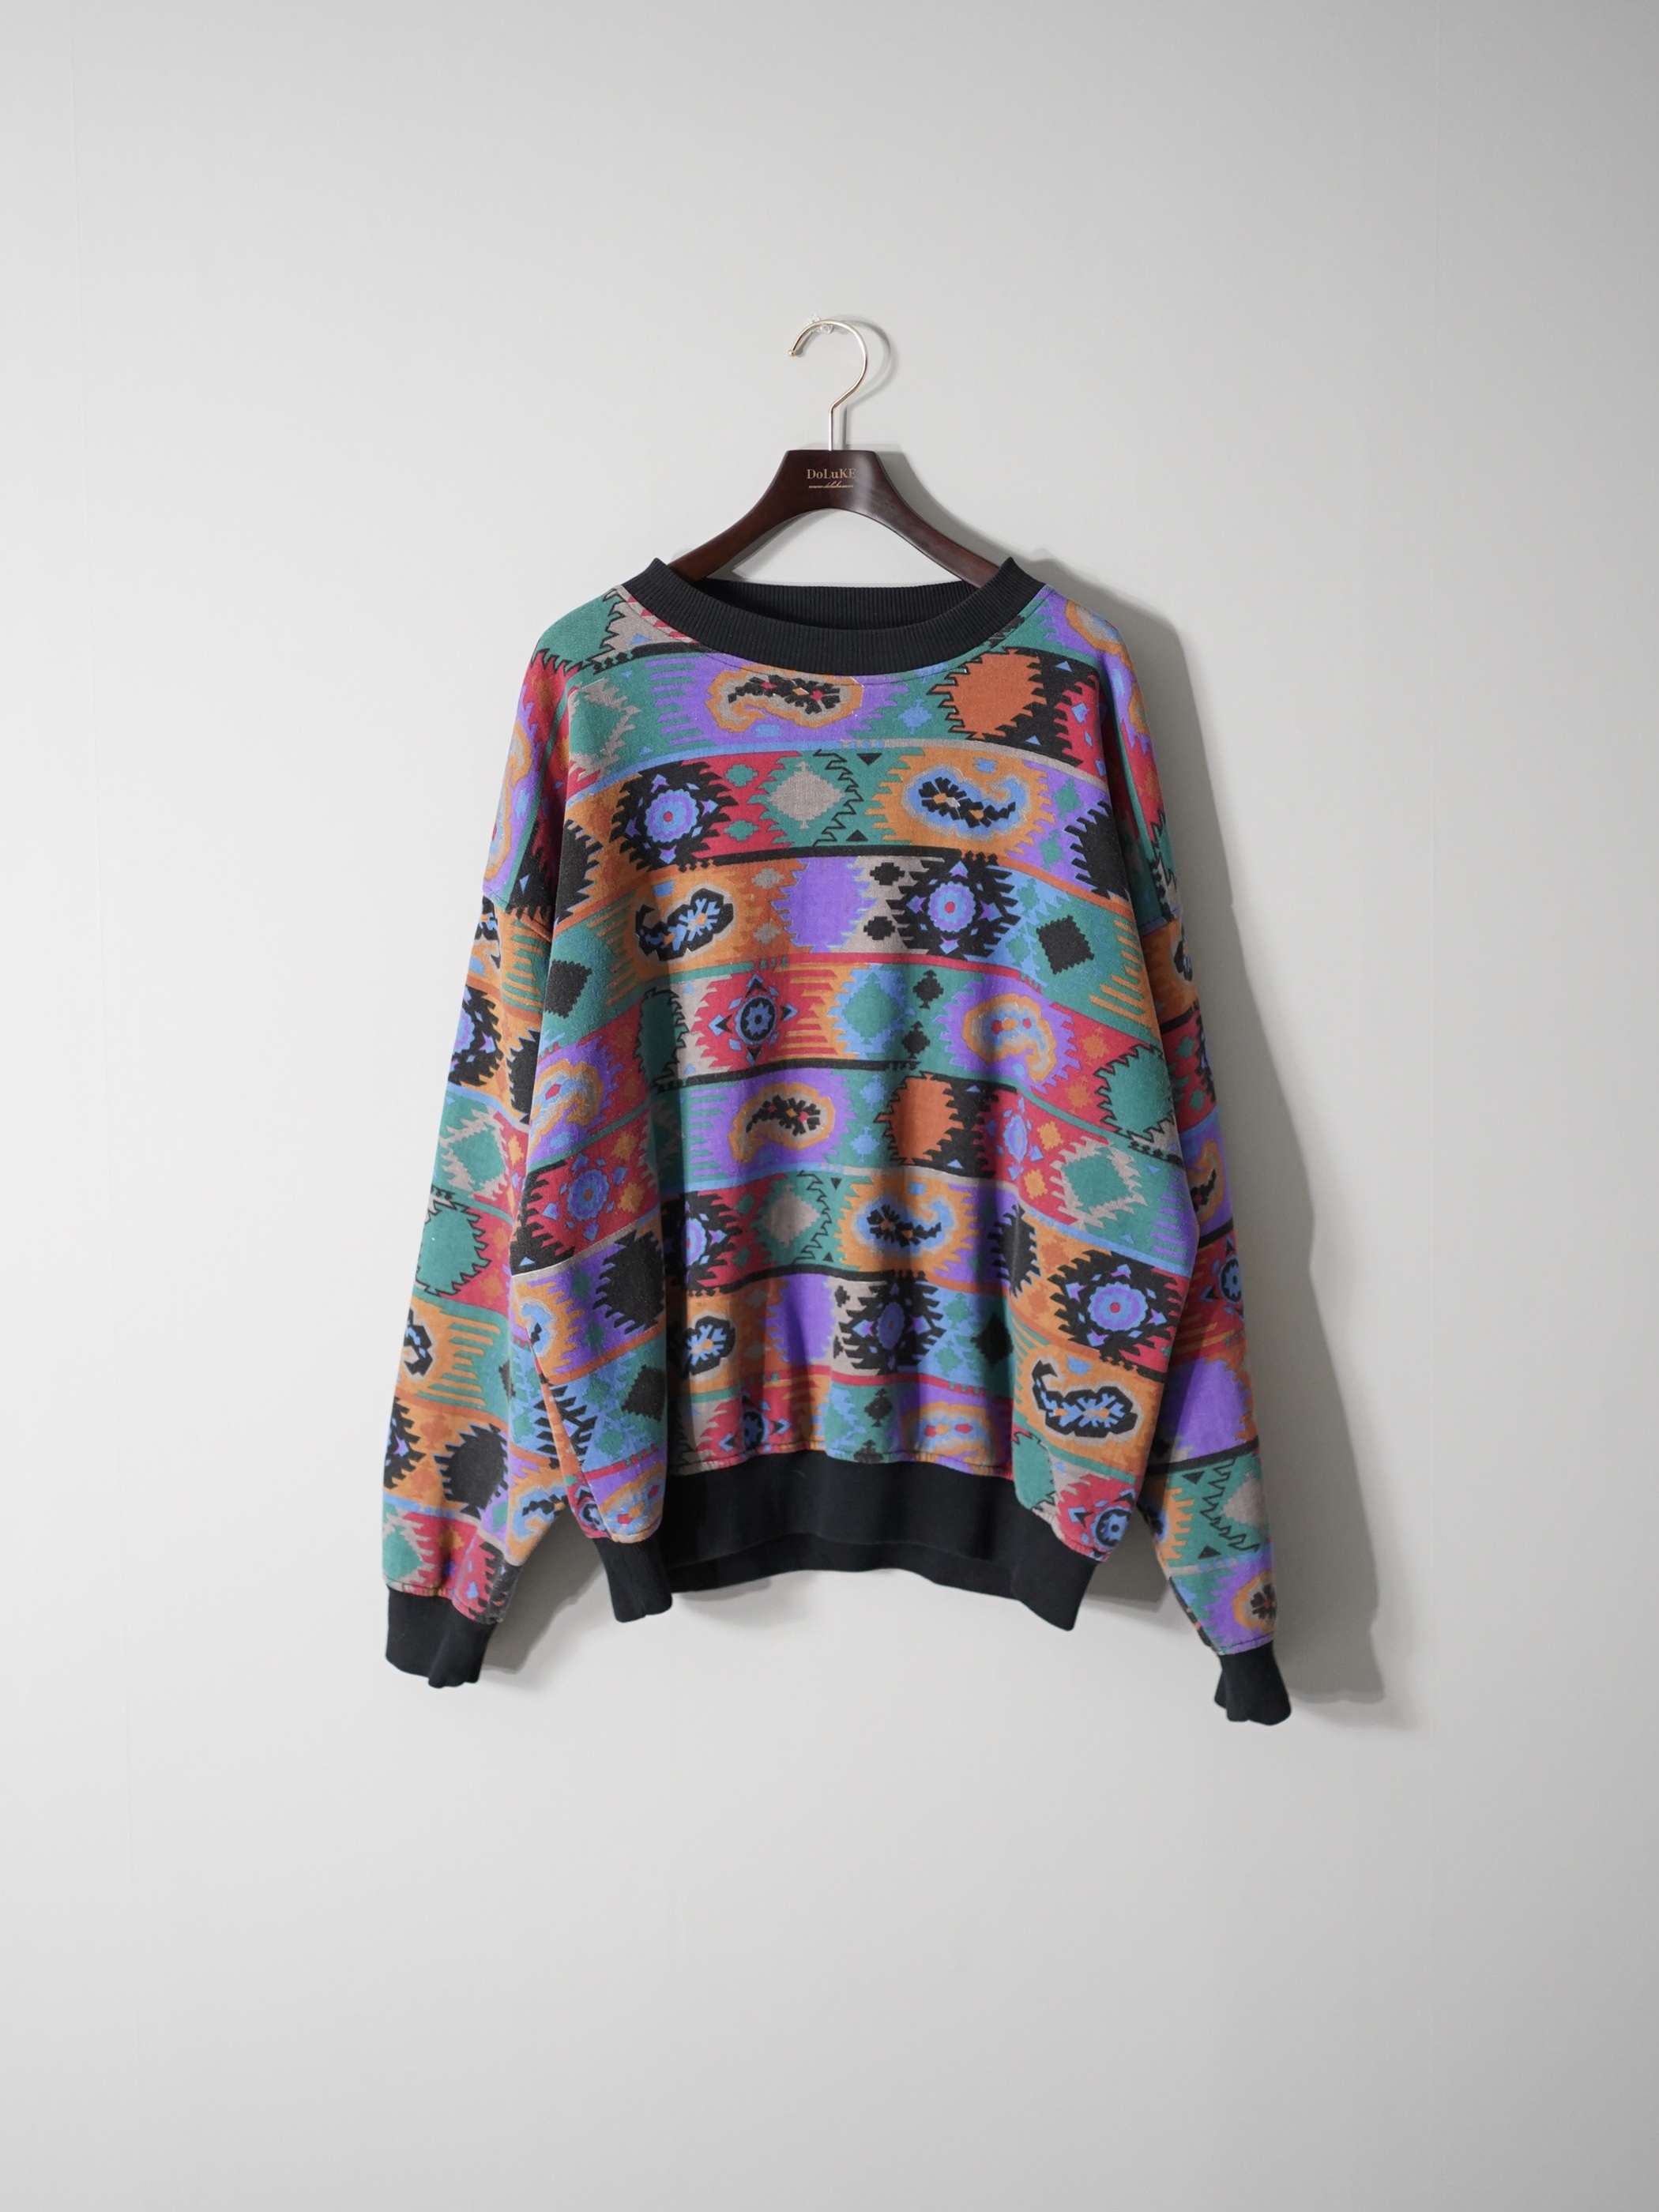 1990's MEMBERS ONLY ethnic print sweat shirts